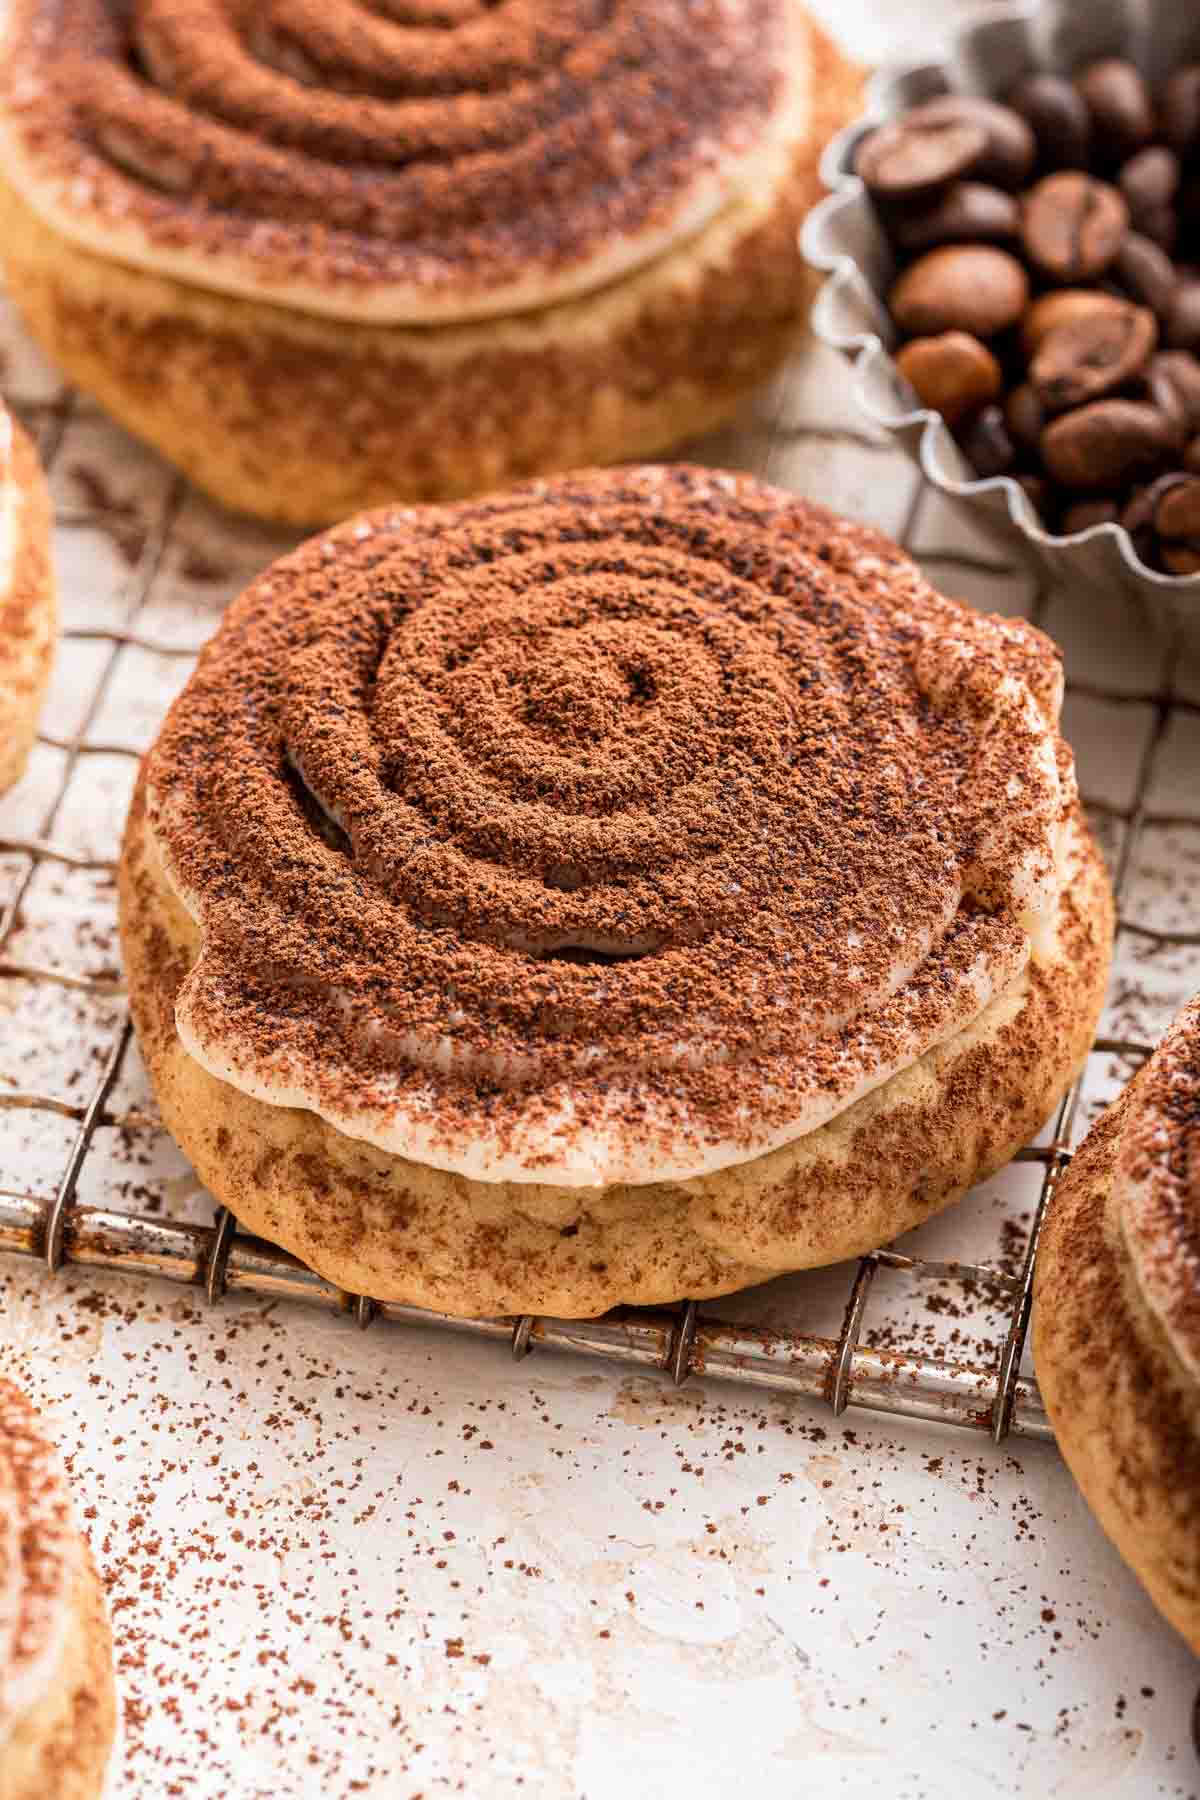 Tiramisu cookie with concentric circle frosting dusted with powdered sugar close-up shot.